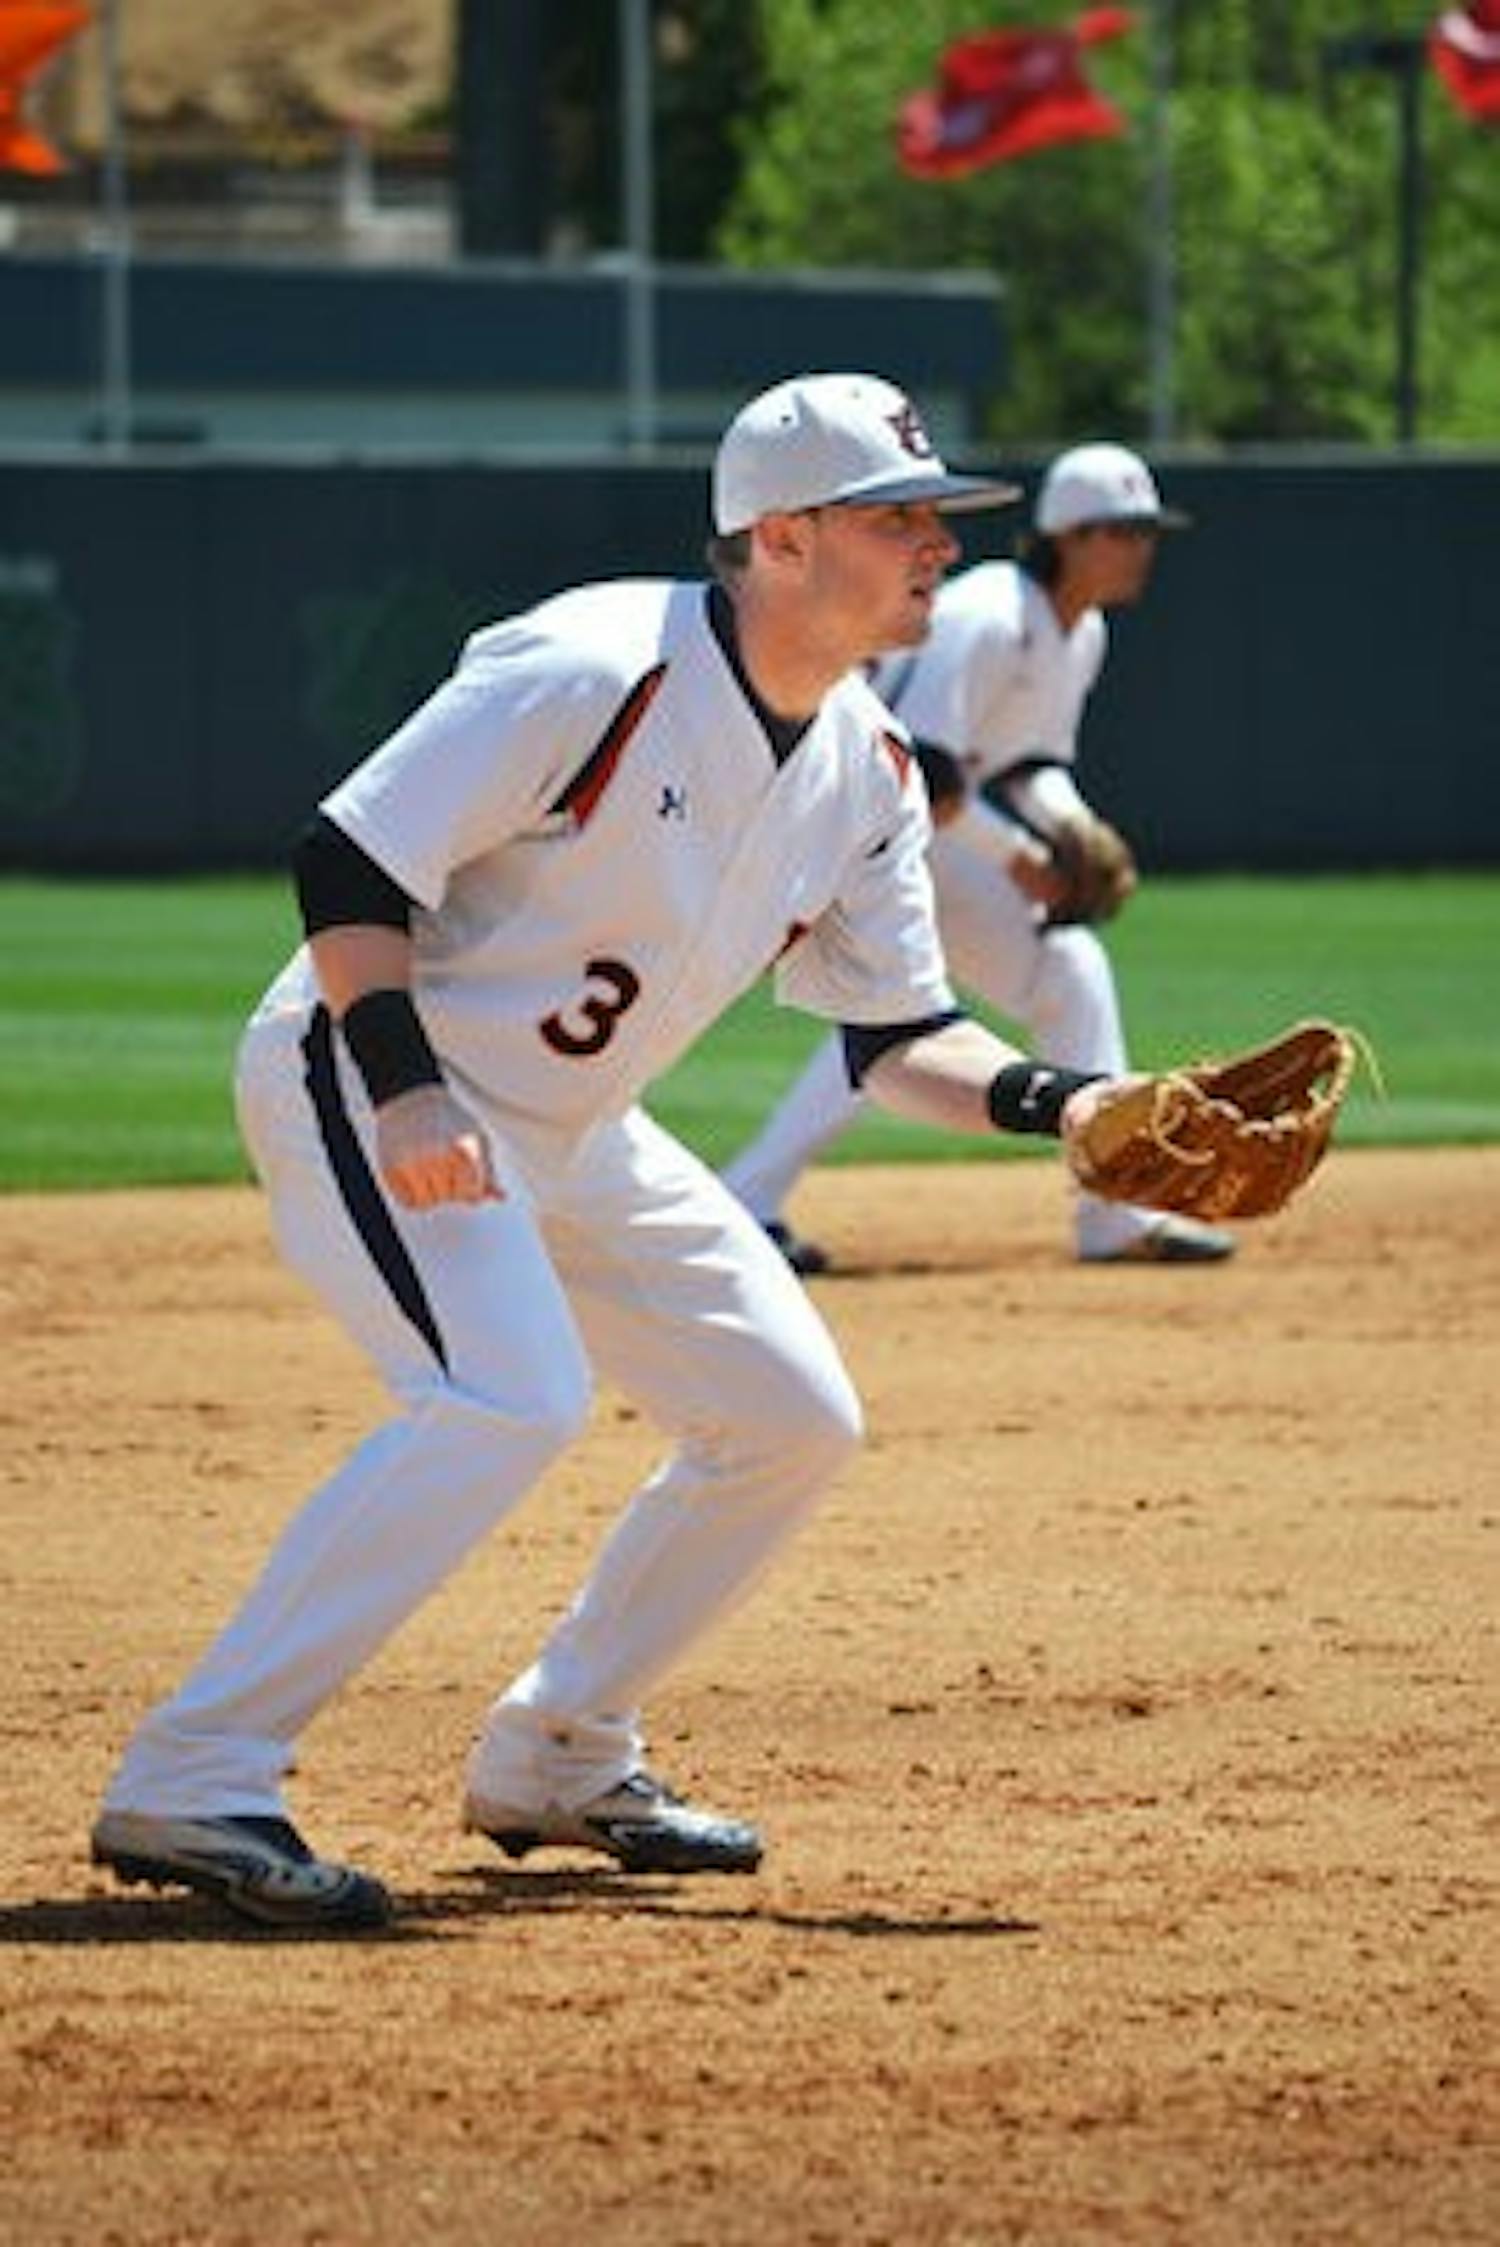 Bryant played six positions during his Auburn career. (Danielle Lowe / ASSISTANT PHOTO EDITOR)